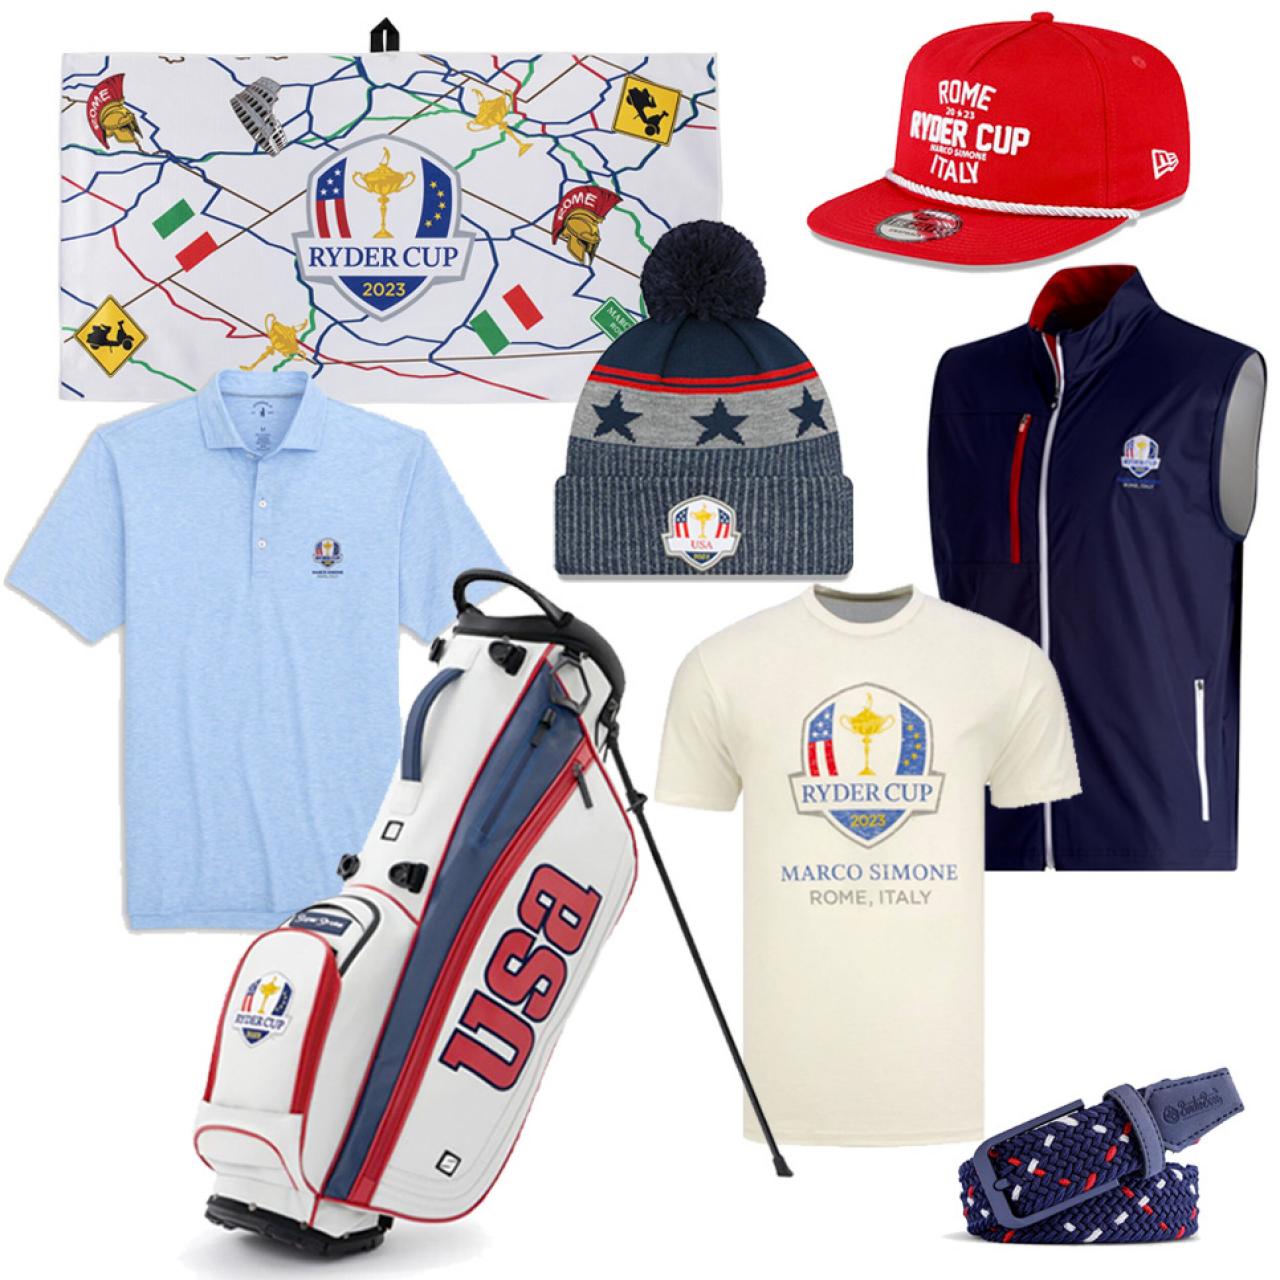 Ryder Cup 2023: Our favorite Ryder Cup-inspired products | Golf